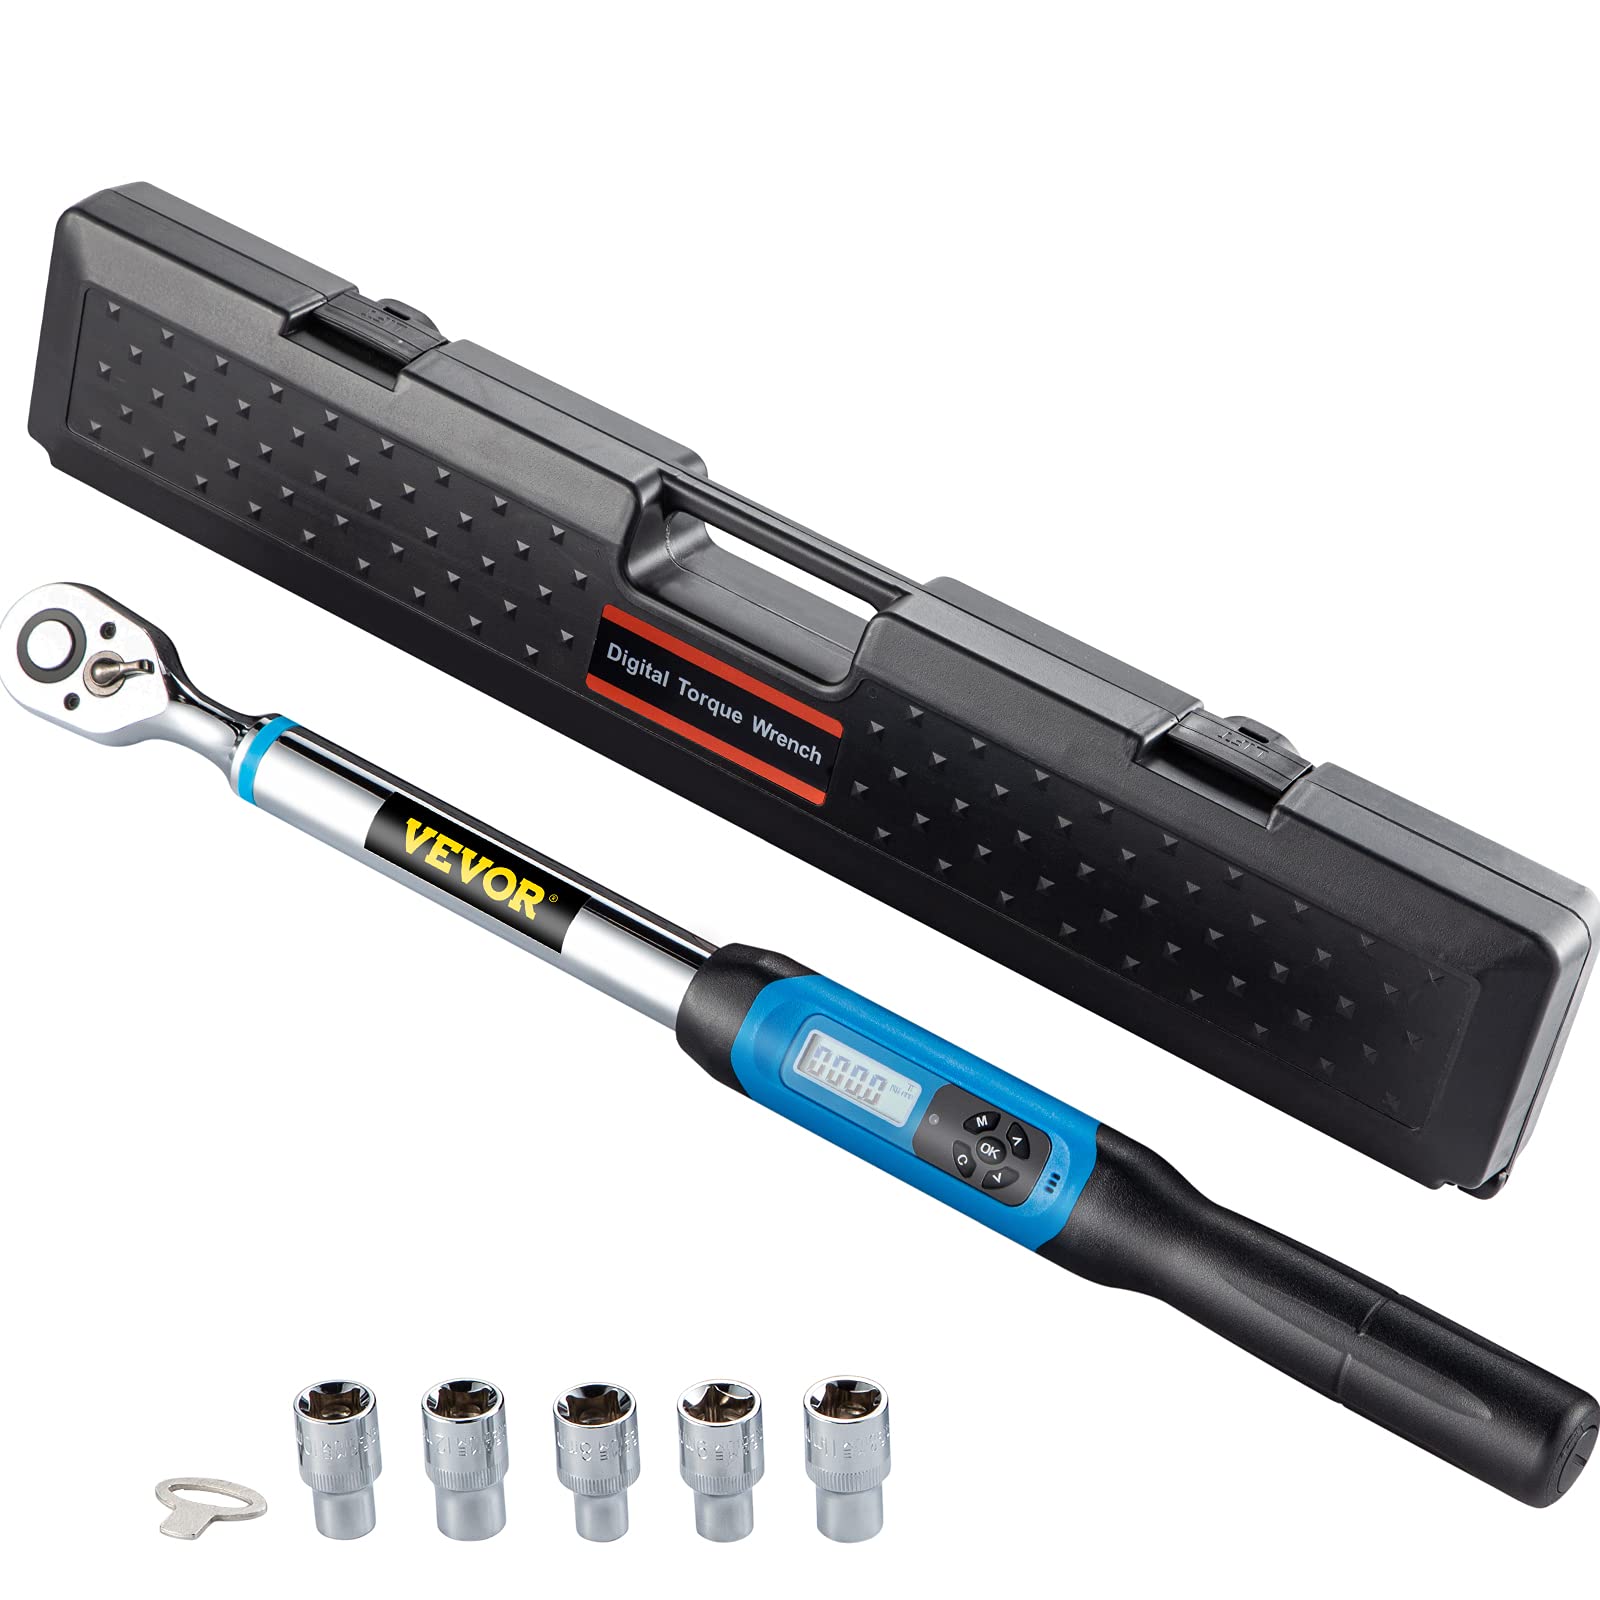 VEVOR Digital Torque Wrench 12 Drive Electronic Torque Wrench Torque Wrench Kit 7.47-147.5 ft-lb Torque Range Accurate to